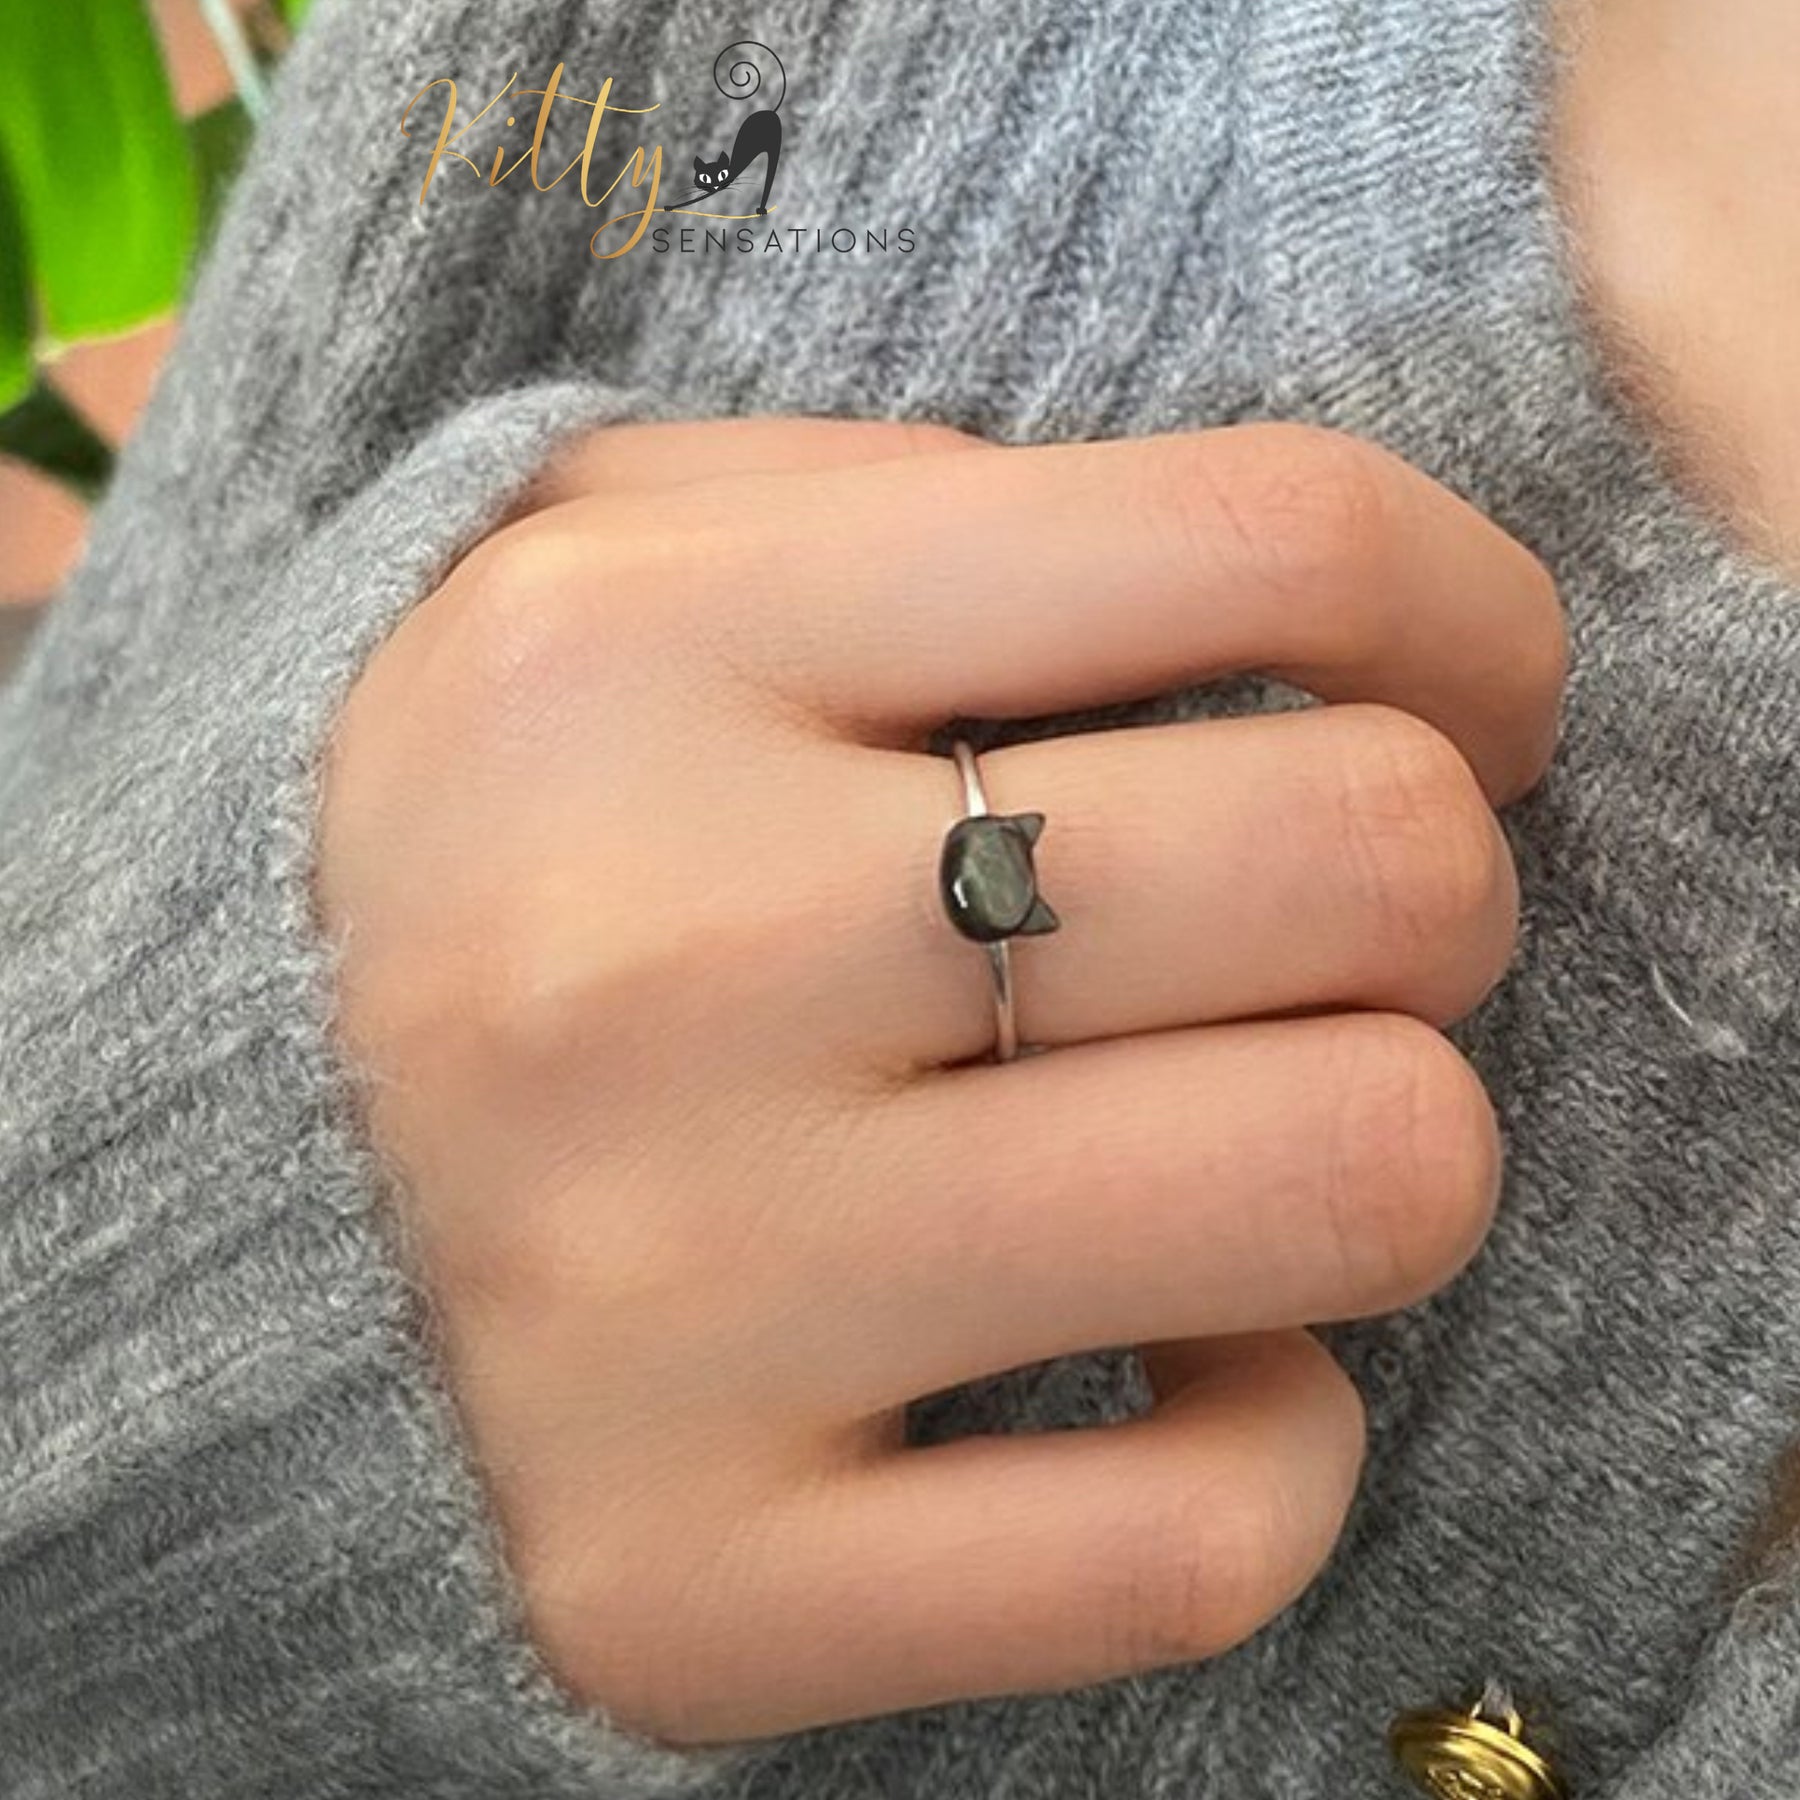 www.KittySensations.com: Mother-of-Pearl Cat Ring in Solid 925 Sterling Silver (Adjustable) ($35.73): https://www.kittysensations.com/products/mother-of-pearl-cat-ring-in-solid-925-sterling-silver-adjustable